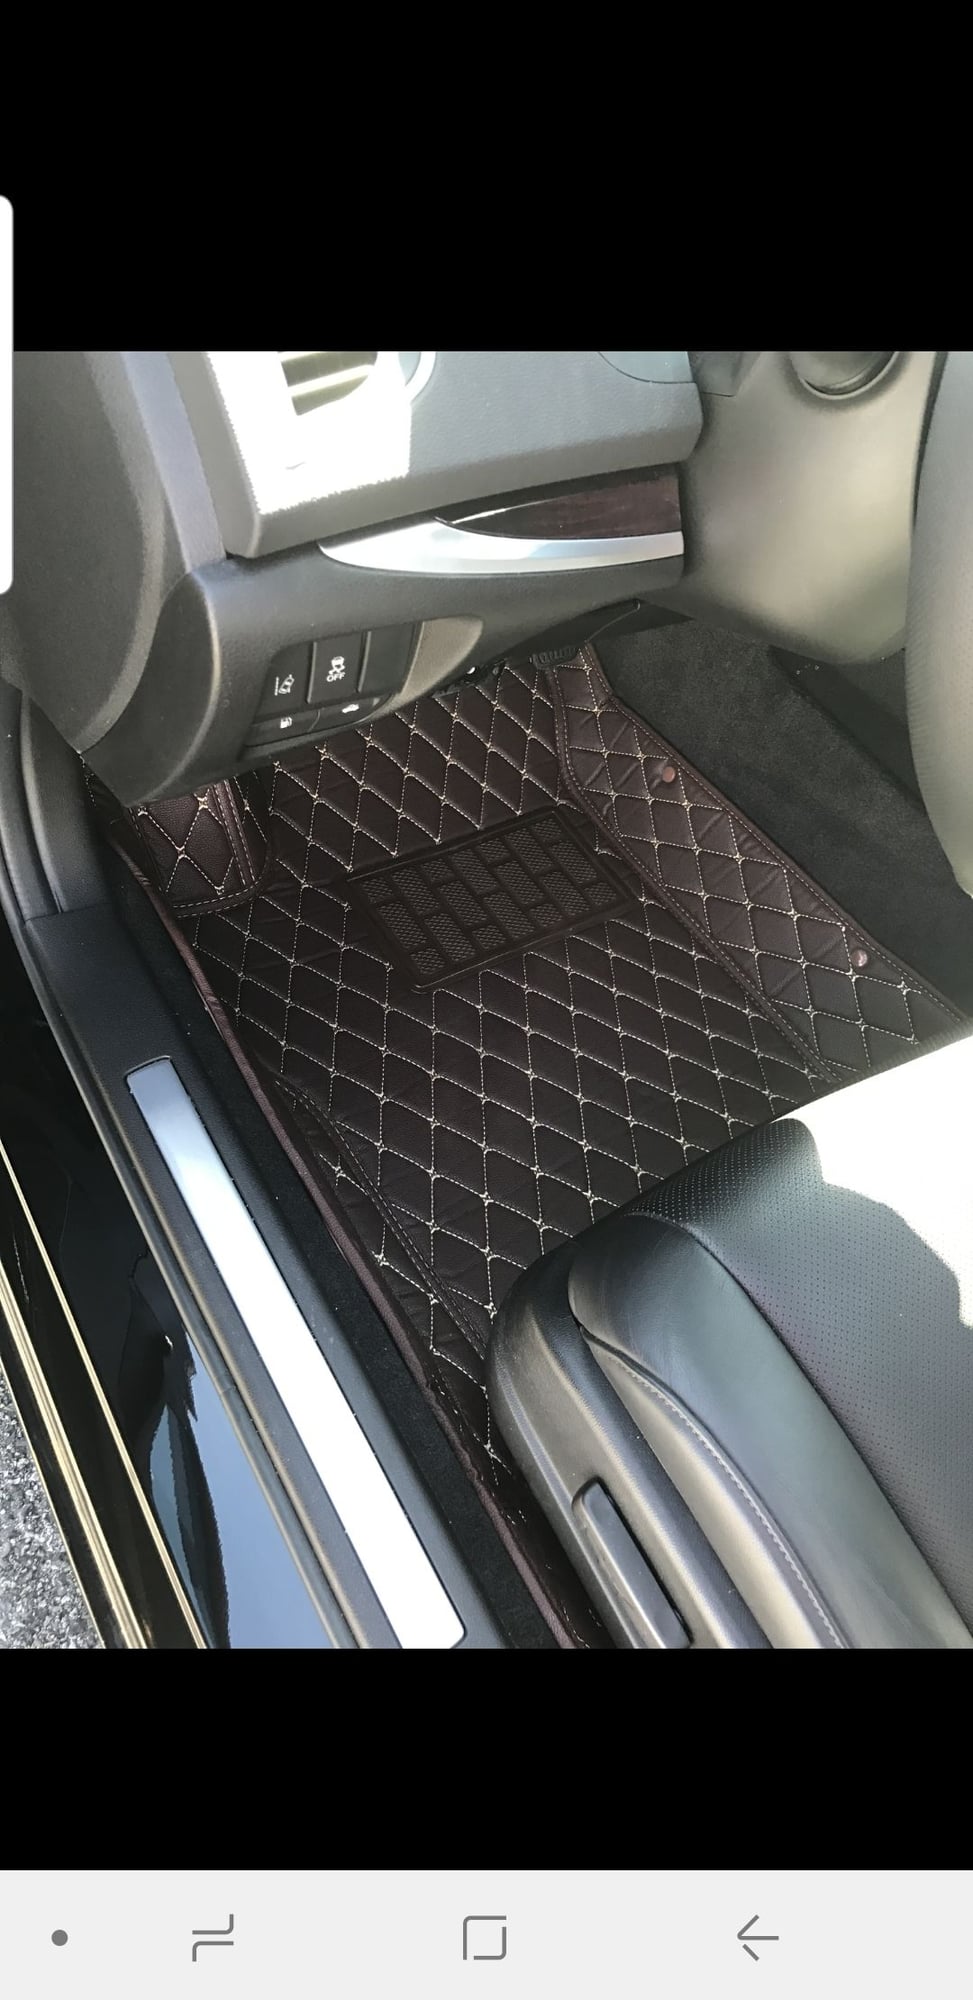 Accessories - EXPIRED FS: 15-17 TLX All weather brown Diamond matts set - Used - 2015 to 2019 Acura TLX - Wappingers, NY 12590, United States